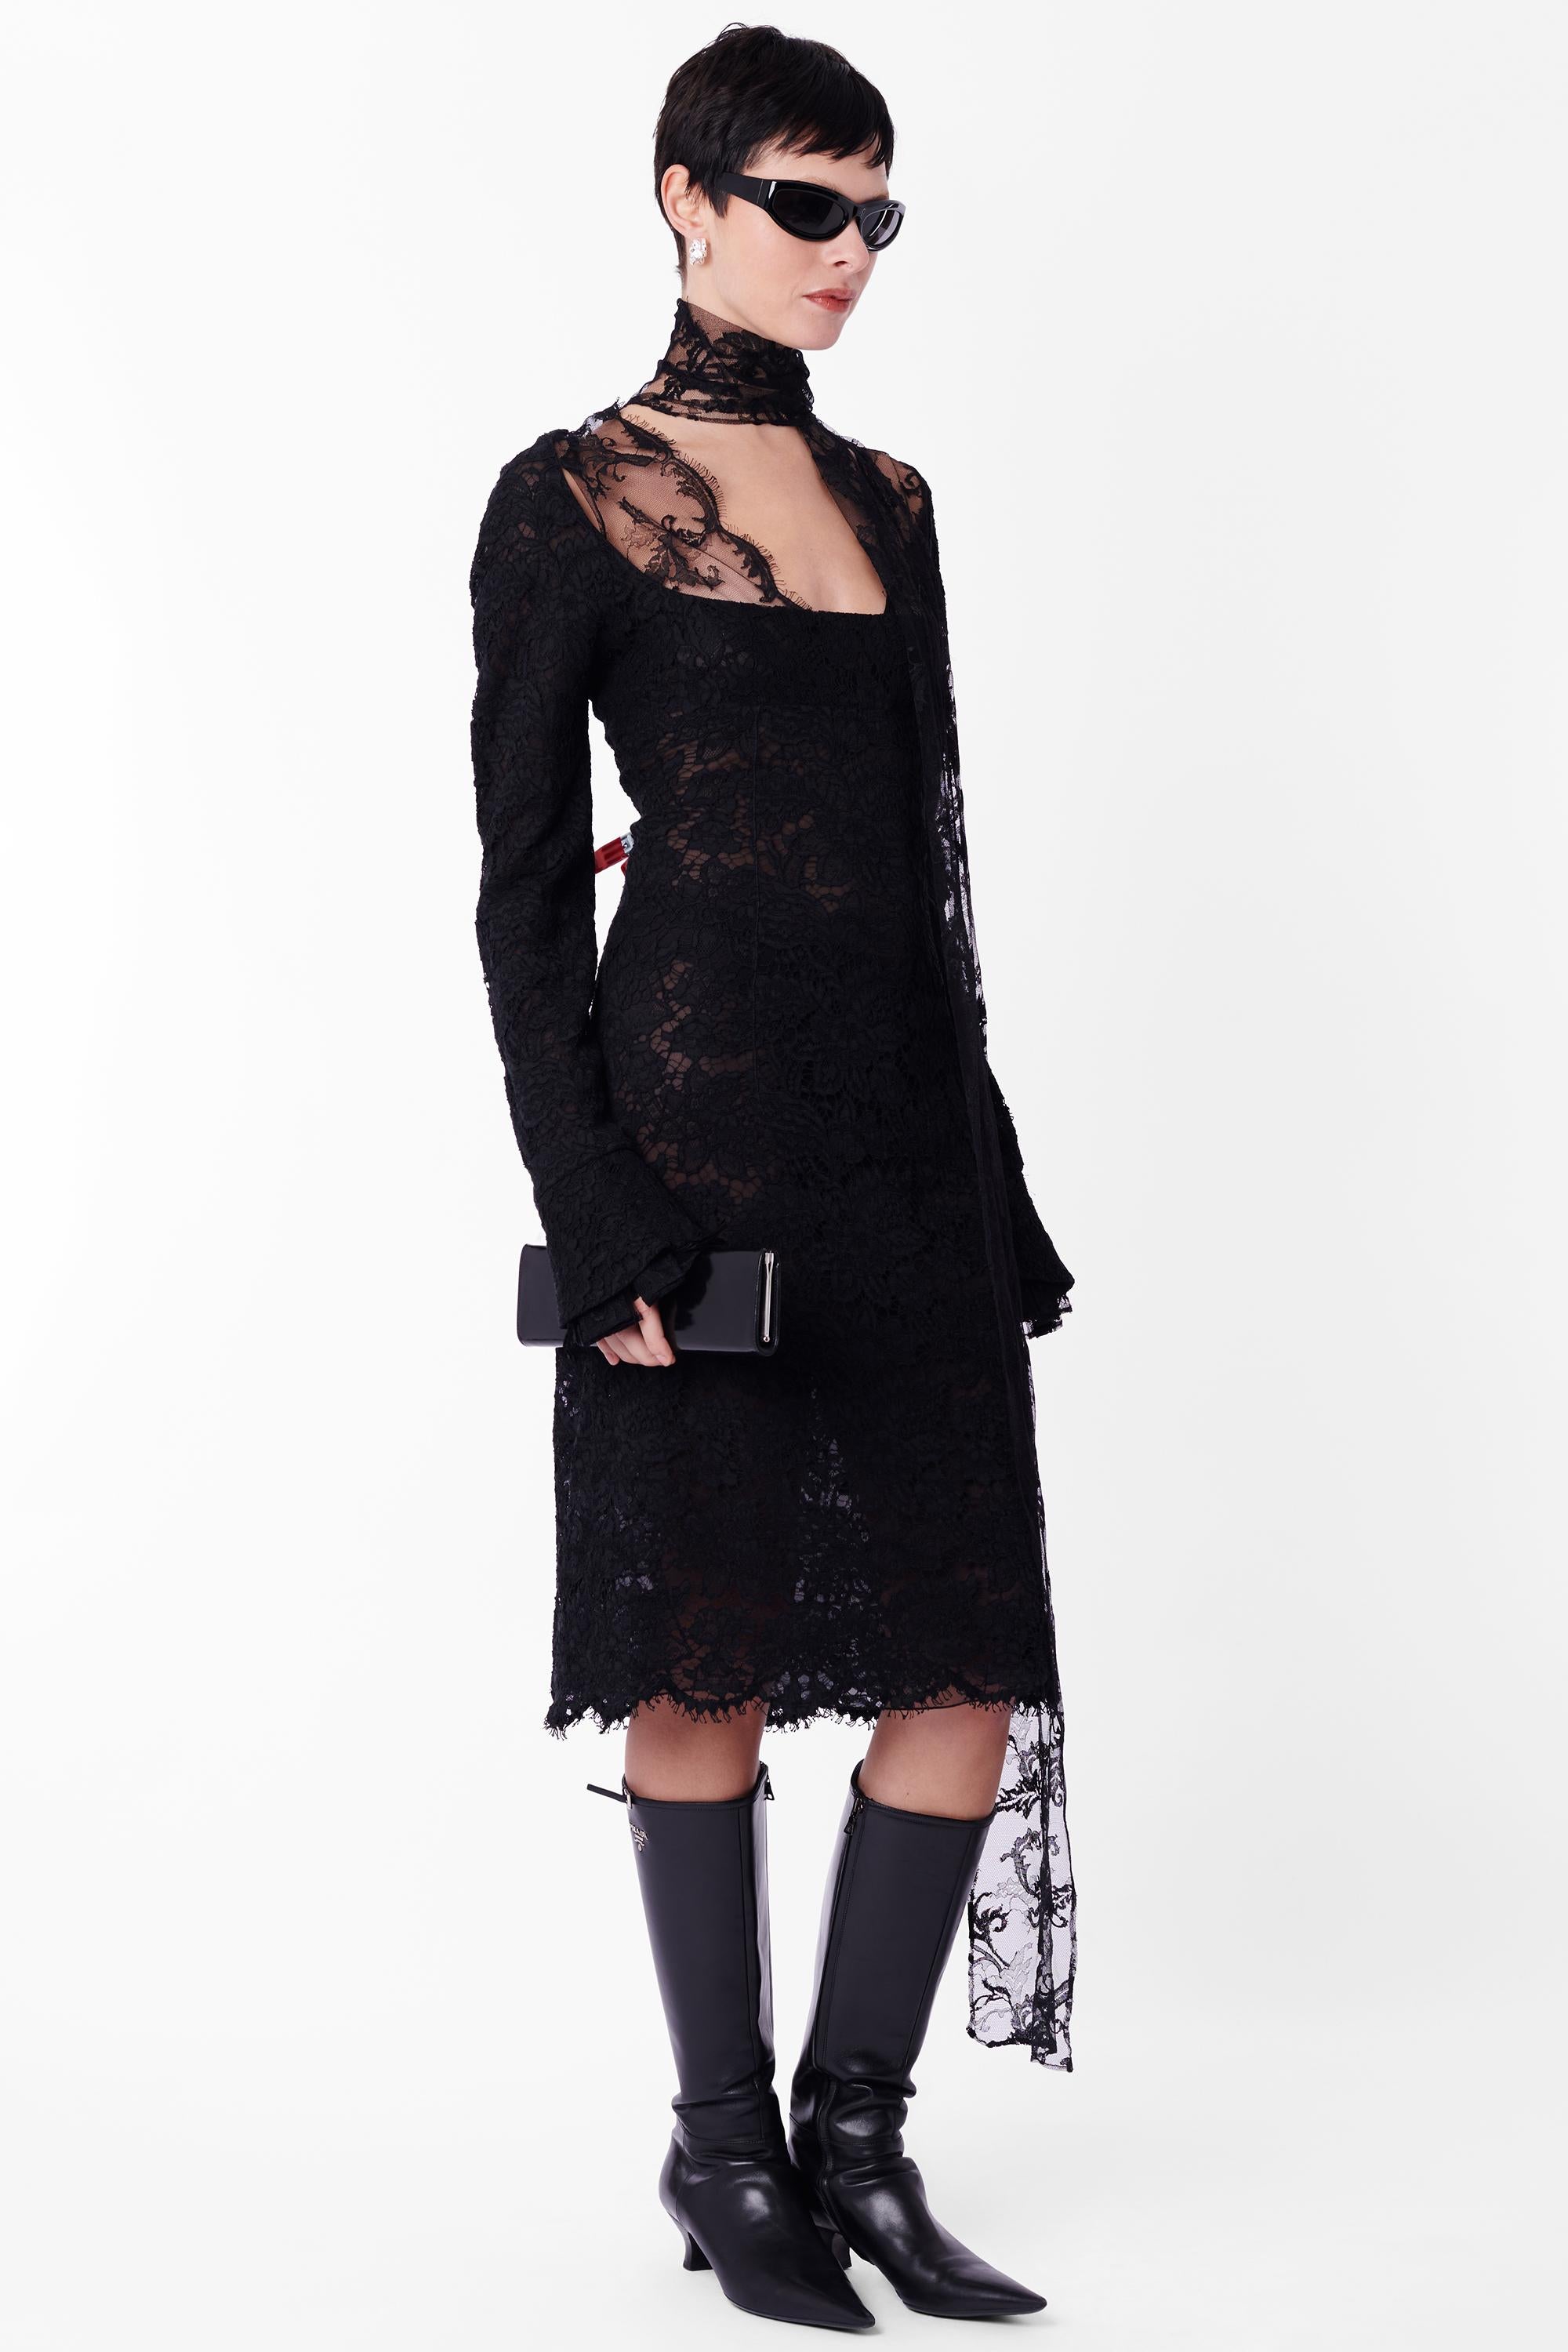 Vintage Yves Saint Laurent by Tom Ford Fall Winter 2002 rare black guipure lace dress. As seen on the runway, look 33. Features guipure lace body, long sleeves with pleated cuffs, open square neck lined with lace trim, connected lace scarf that can